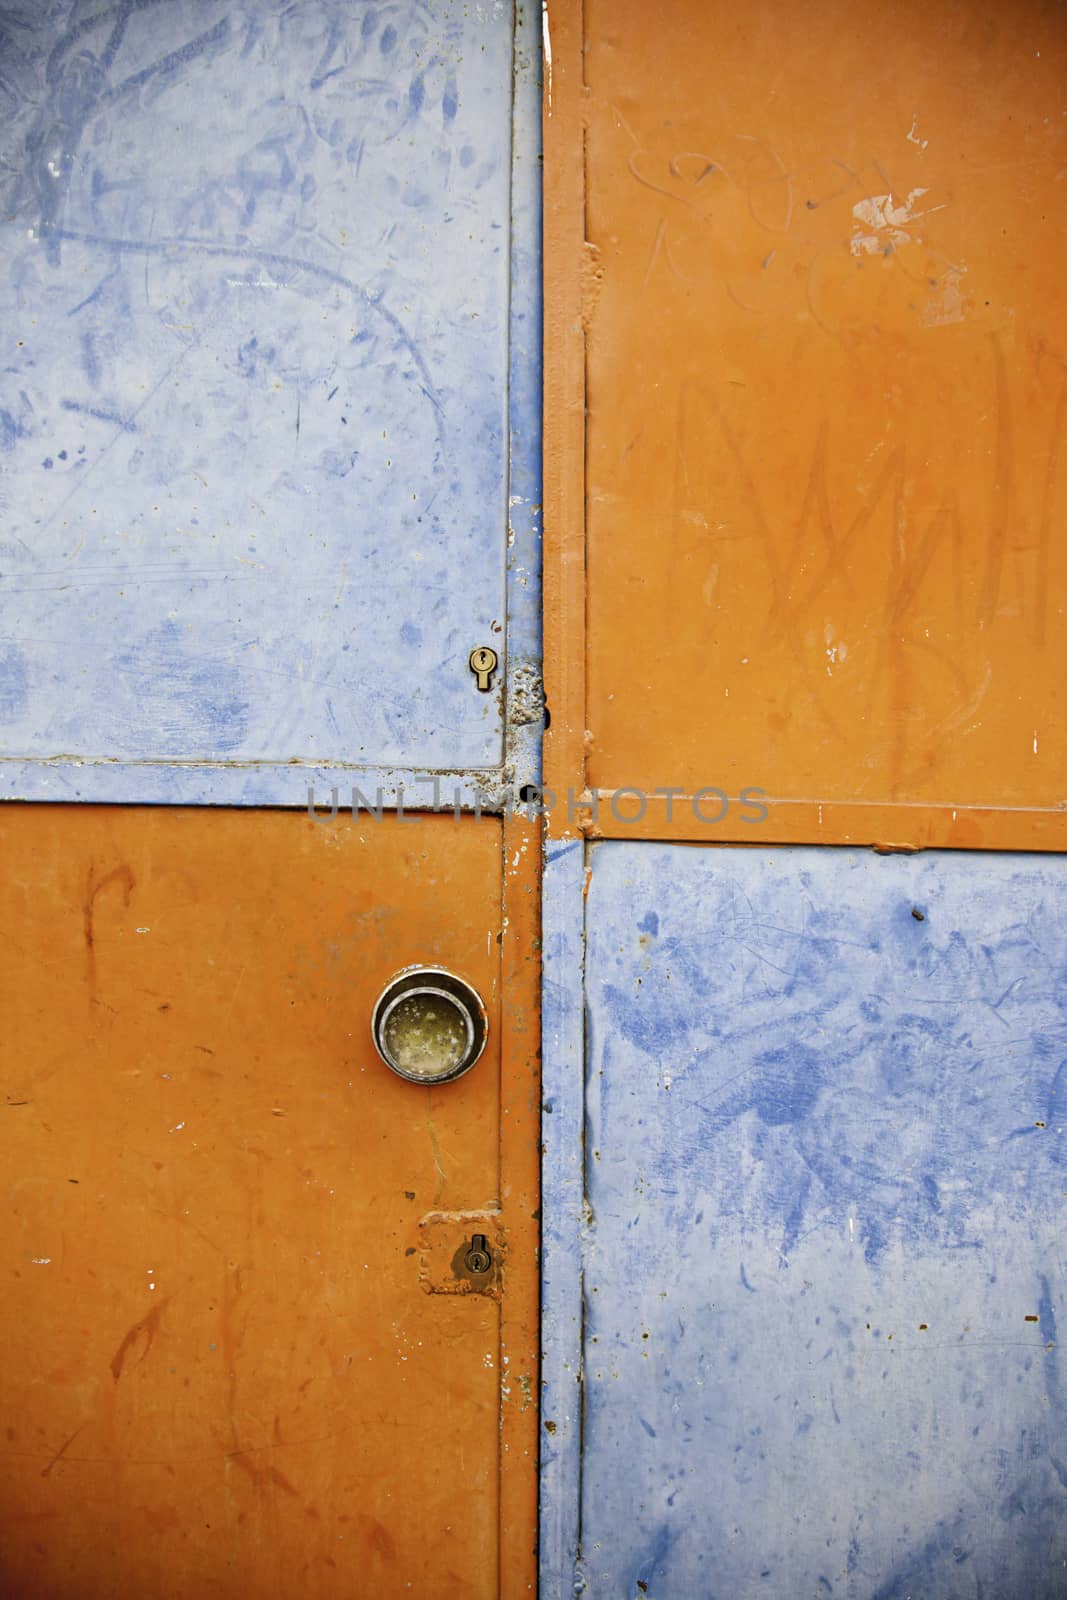 Orange and blue closed door, detail of a decorated door in the city, loneliness and abandonment